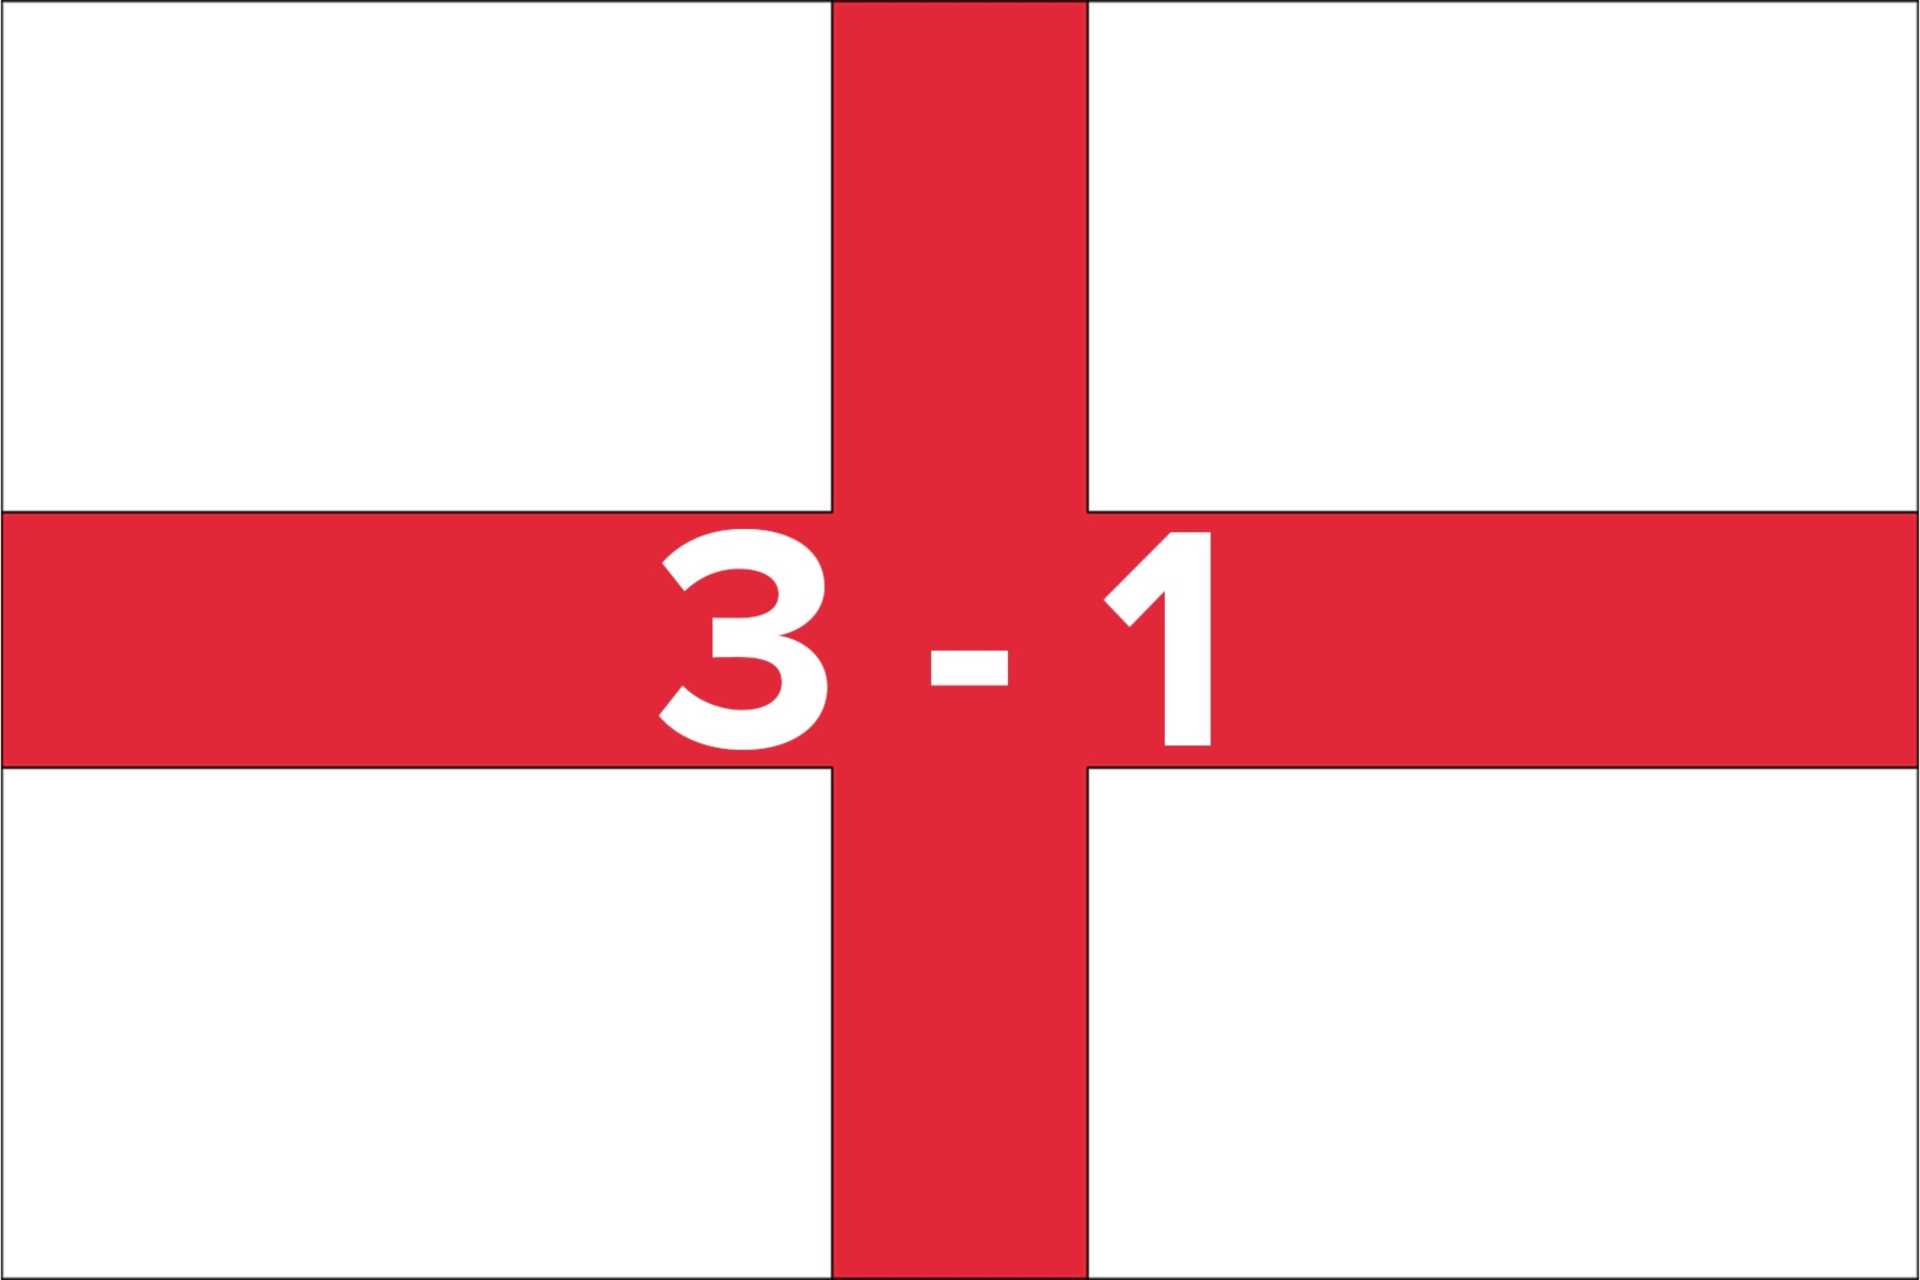 Well done England  - WORLD CUP FINAL.